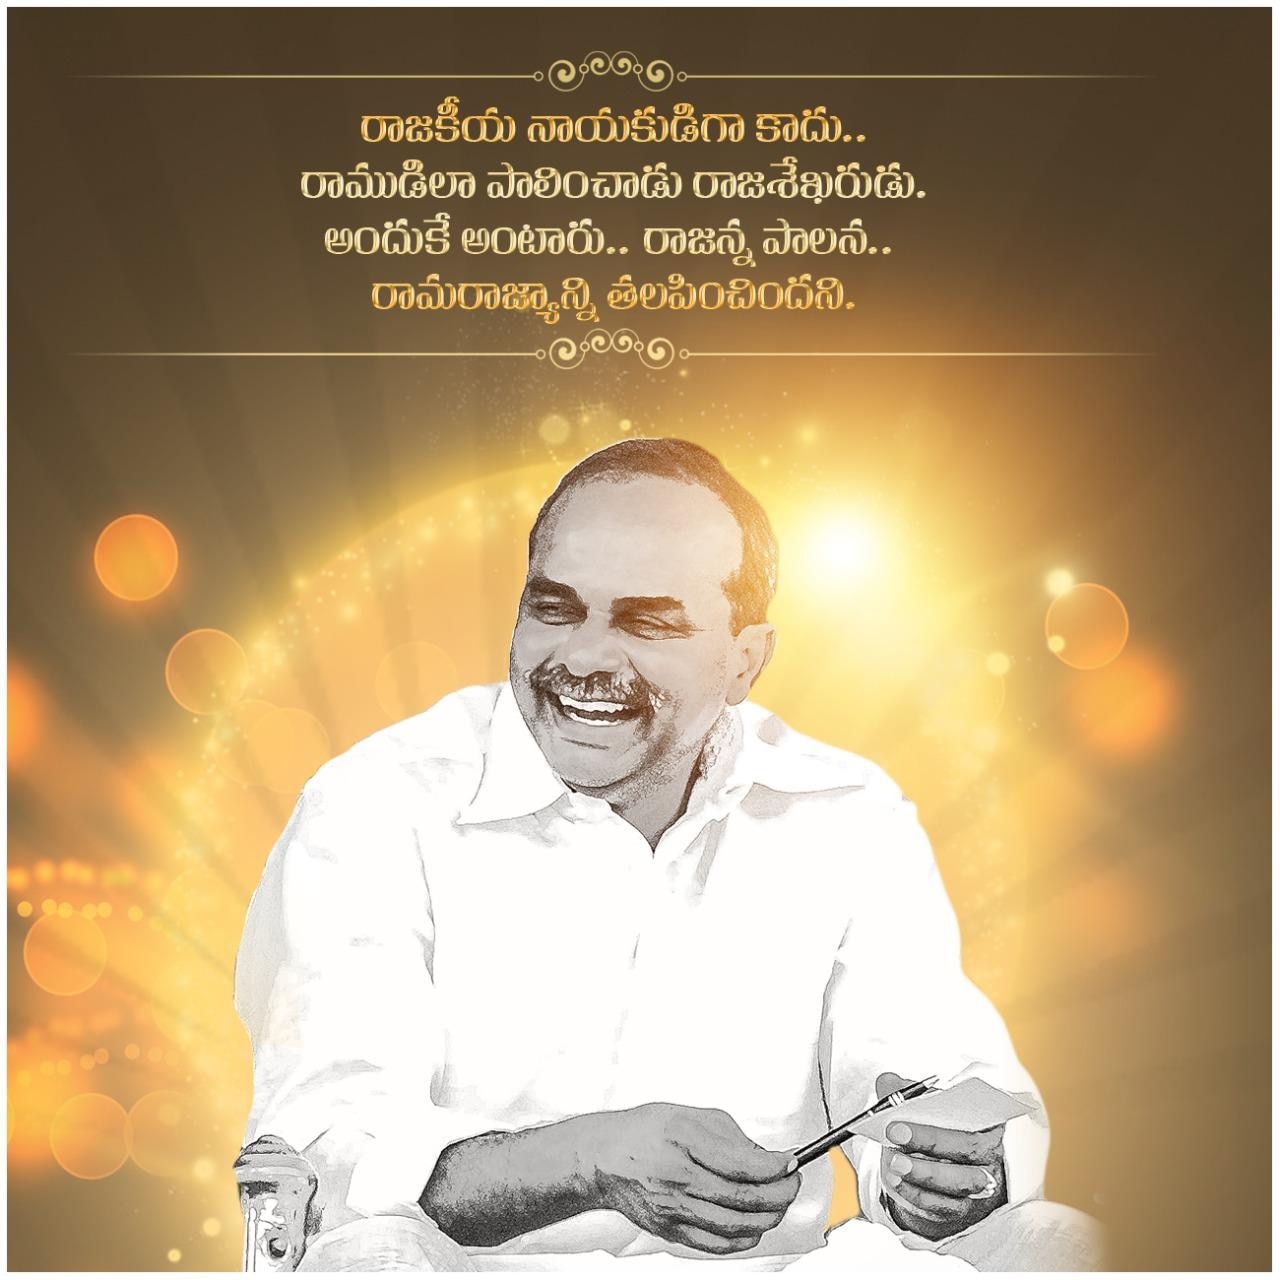 Amazing Ysr Vardhanthi Quotes in the year 2023 The ultimate guide 